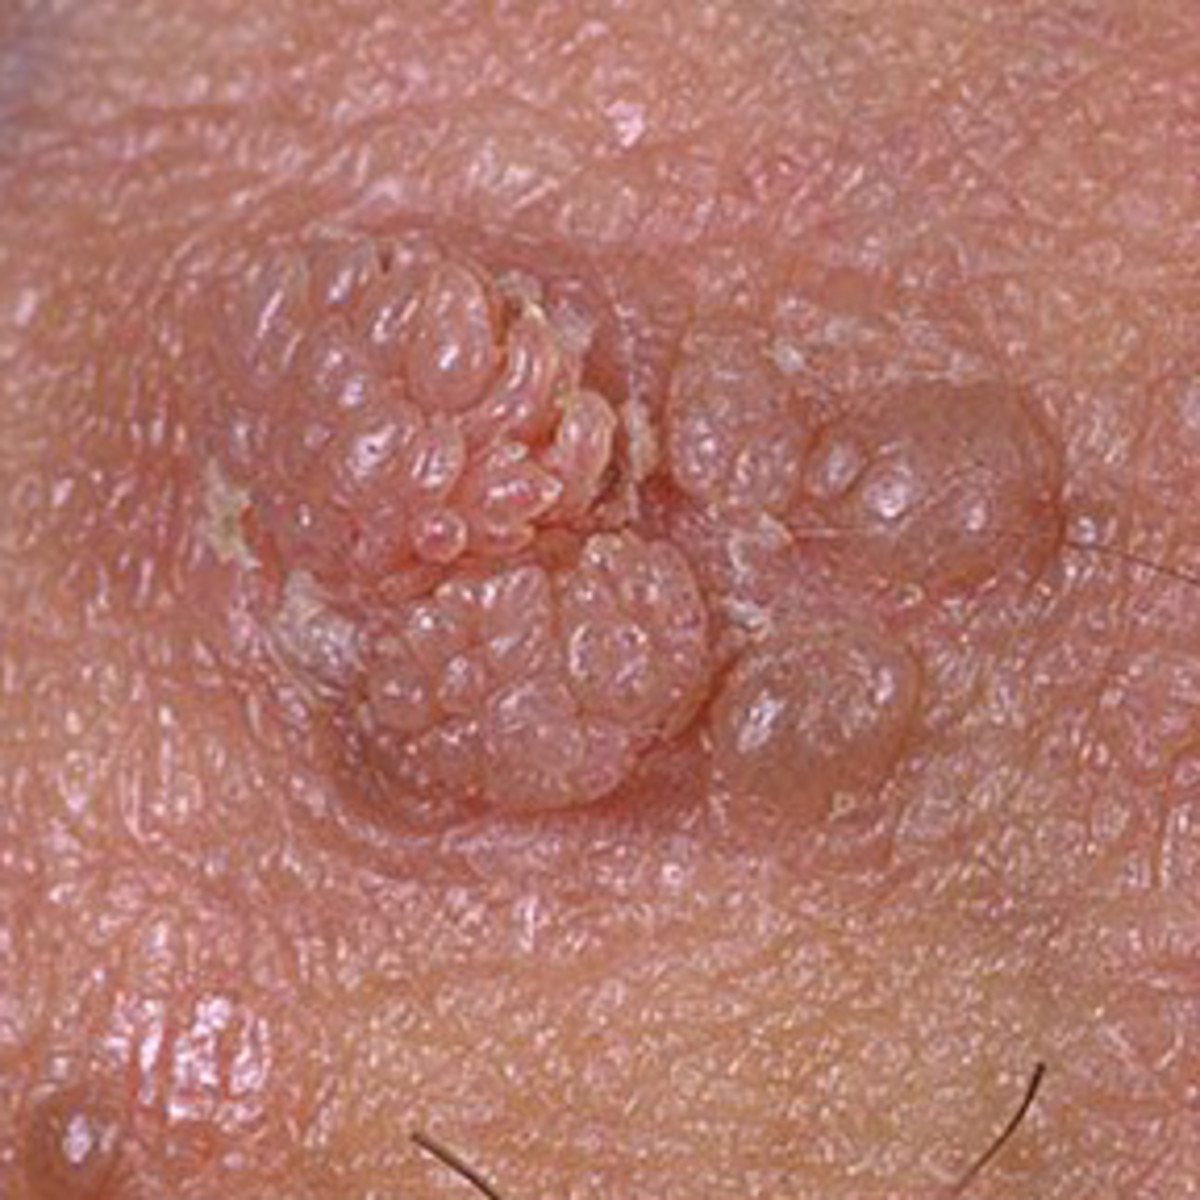 There are many images on the web that demonstrate the seriousness of this disease.